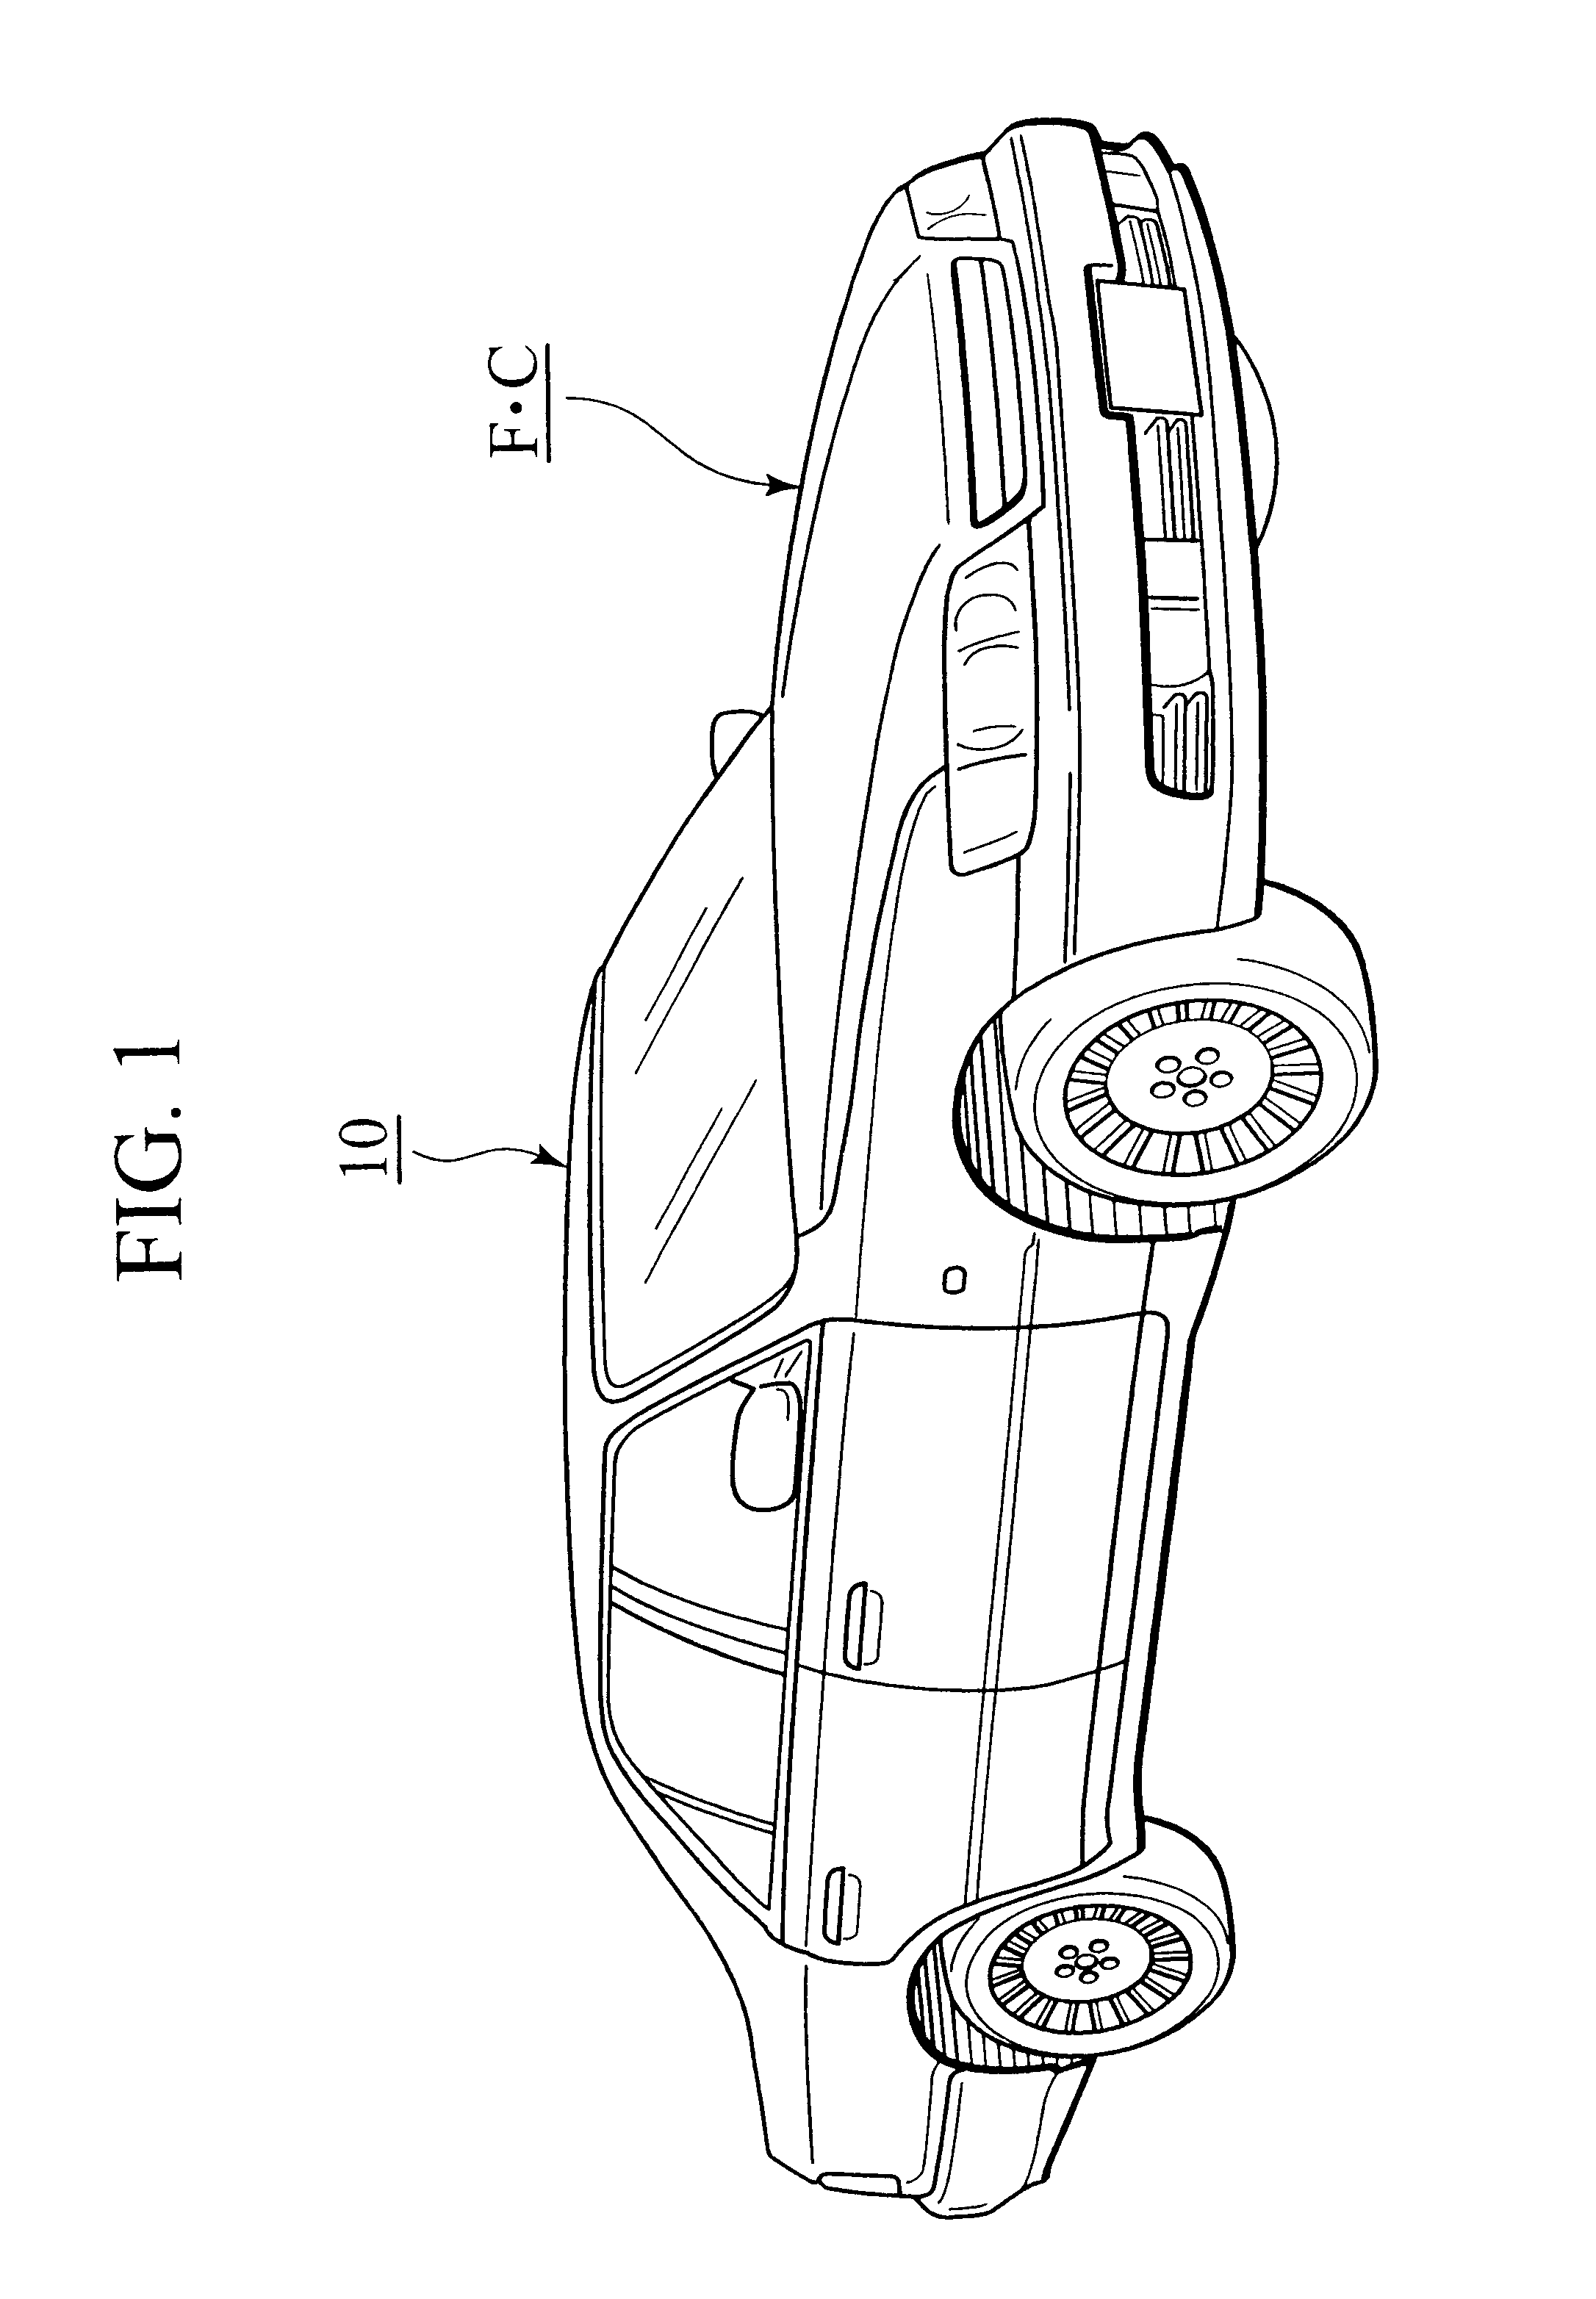 Front body structure for vehicle